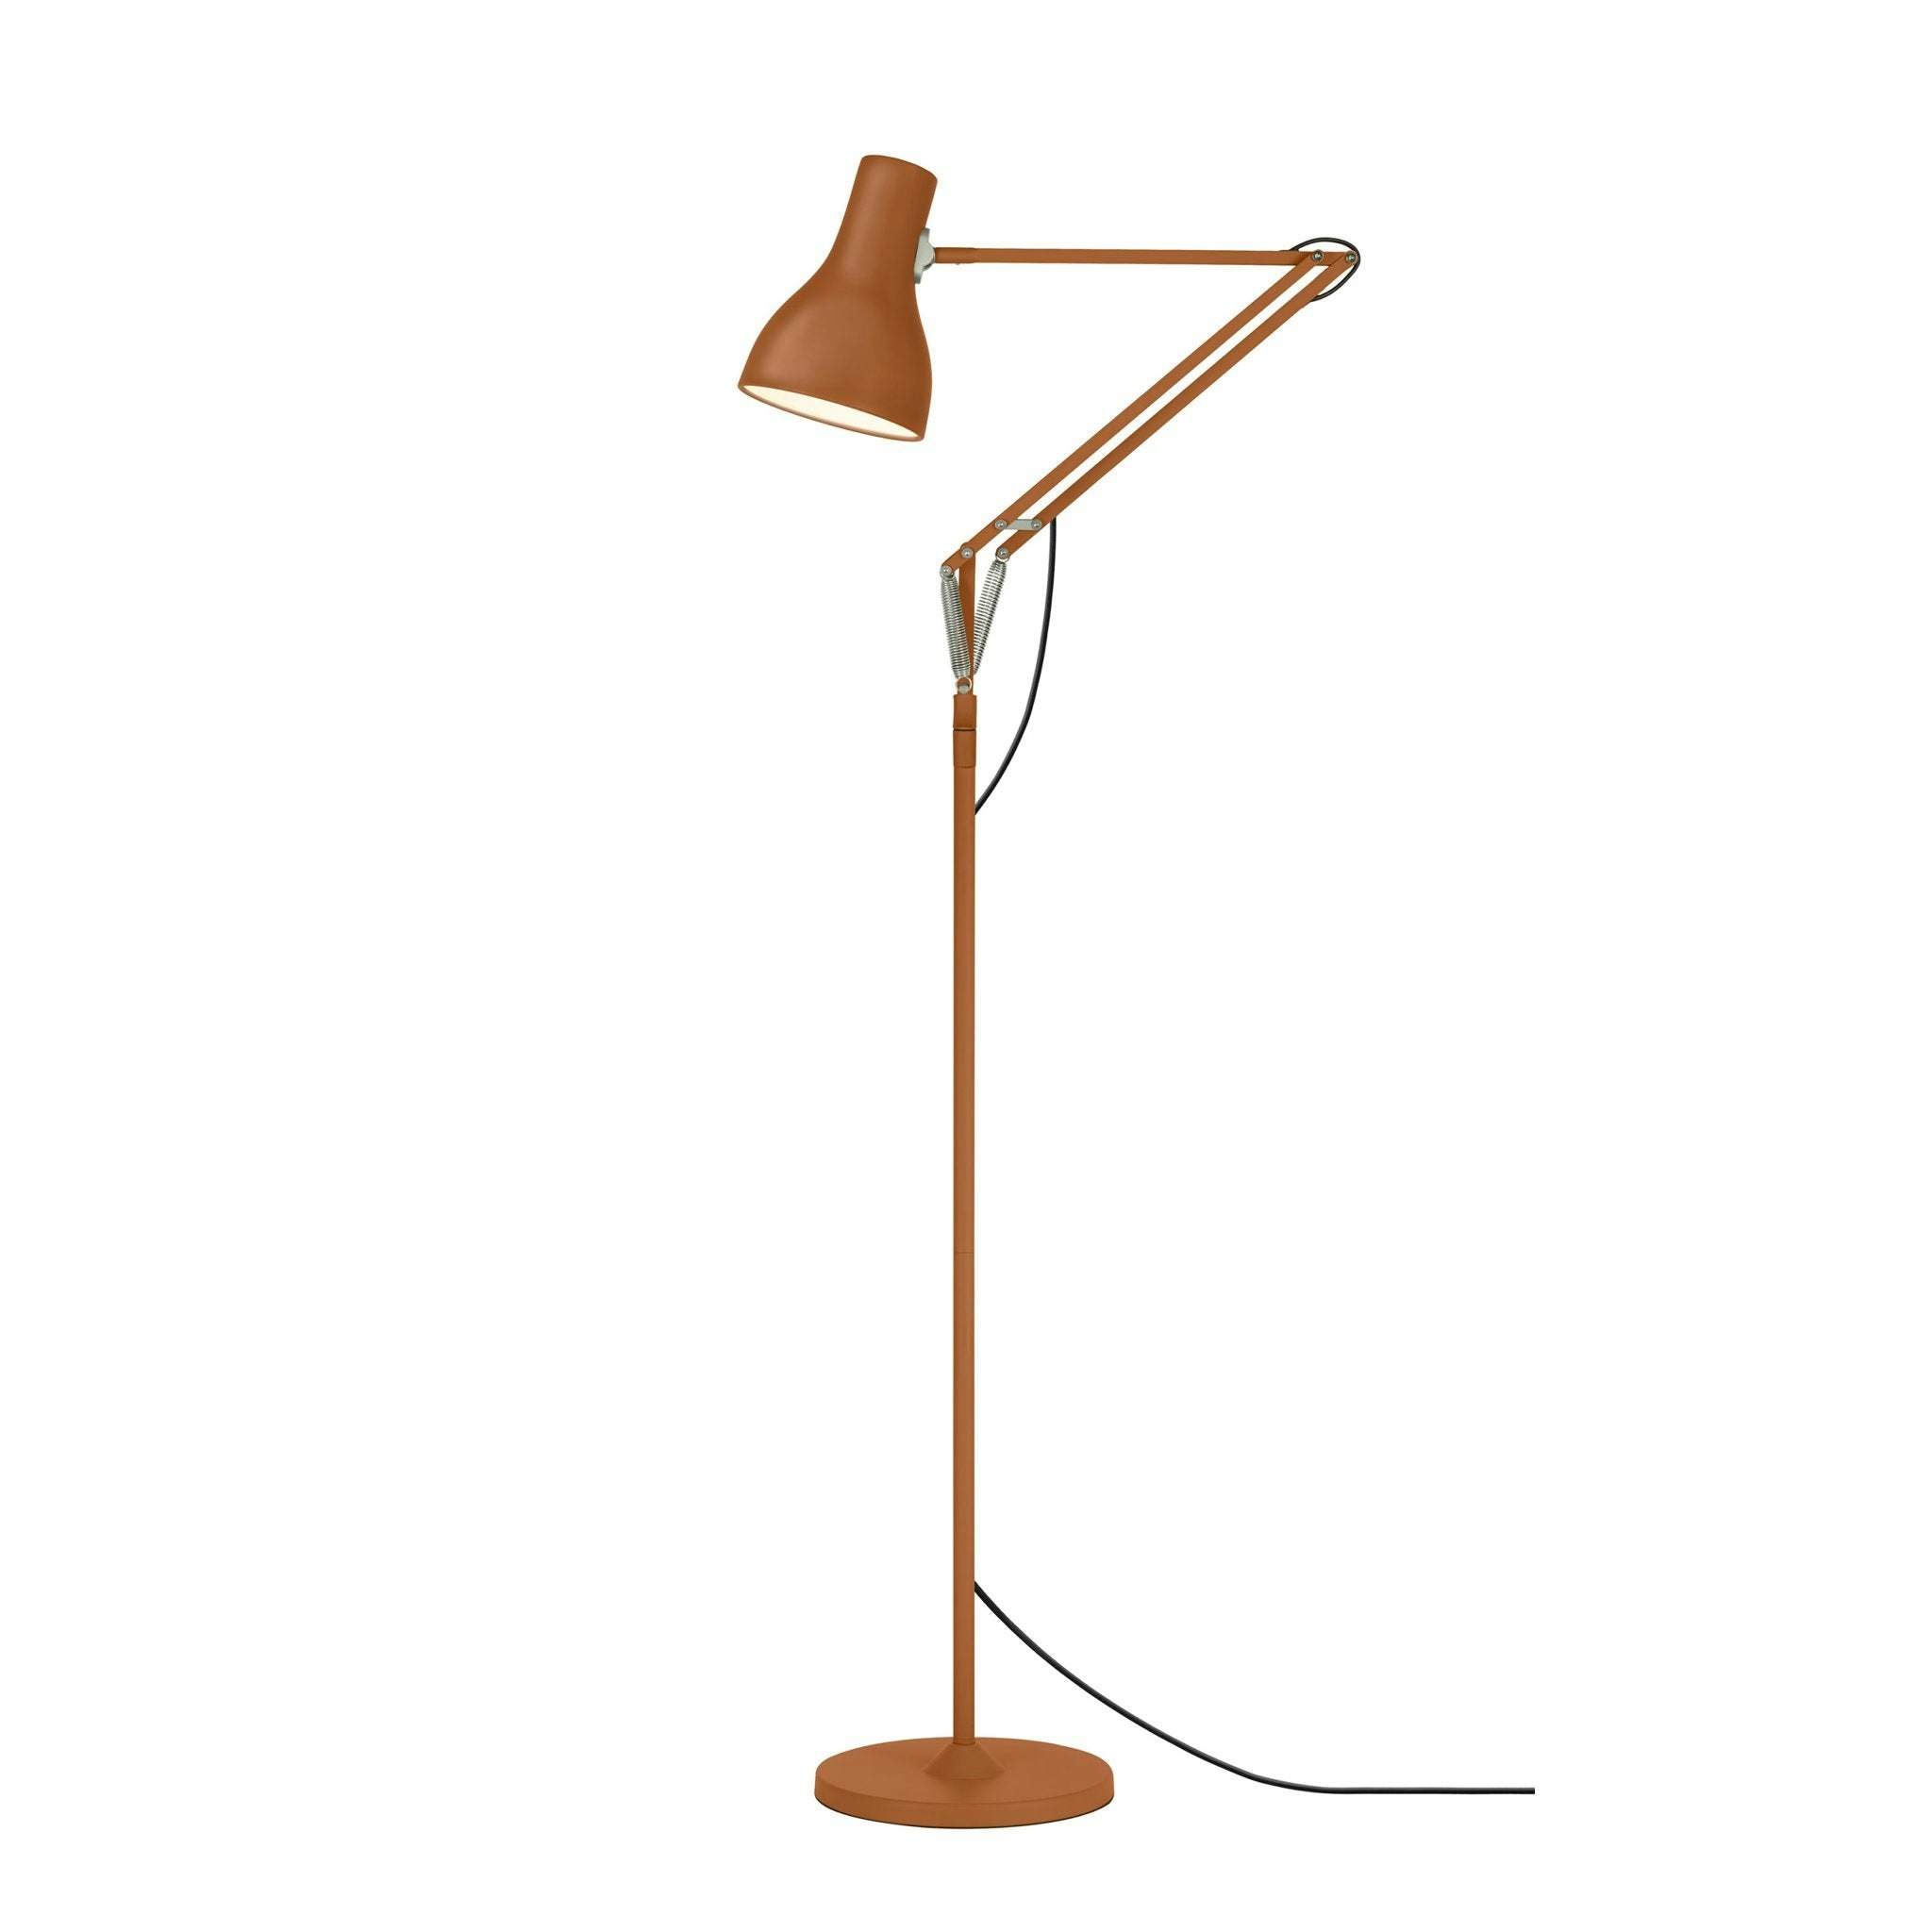 Type 75 Floor Lamp Sienna Edition by Margaret Howell for Anglepoise